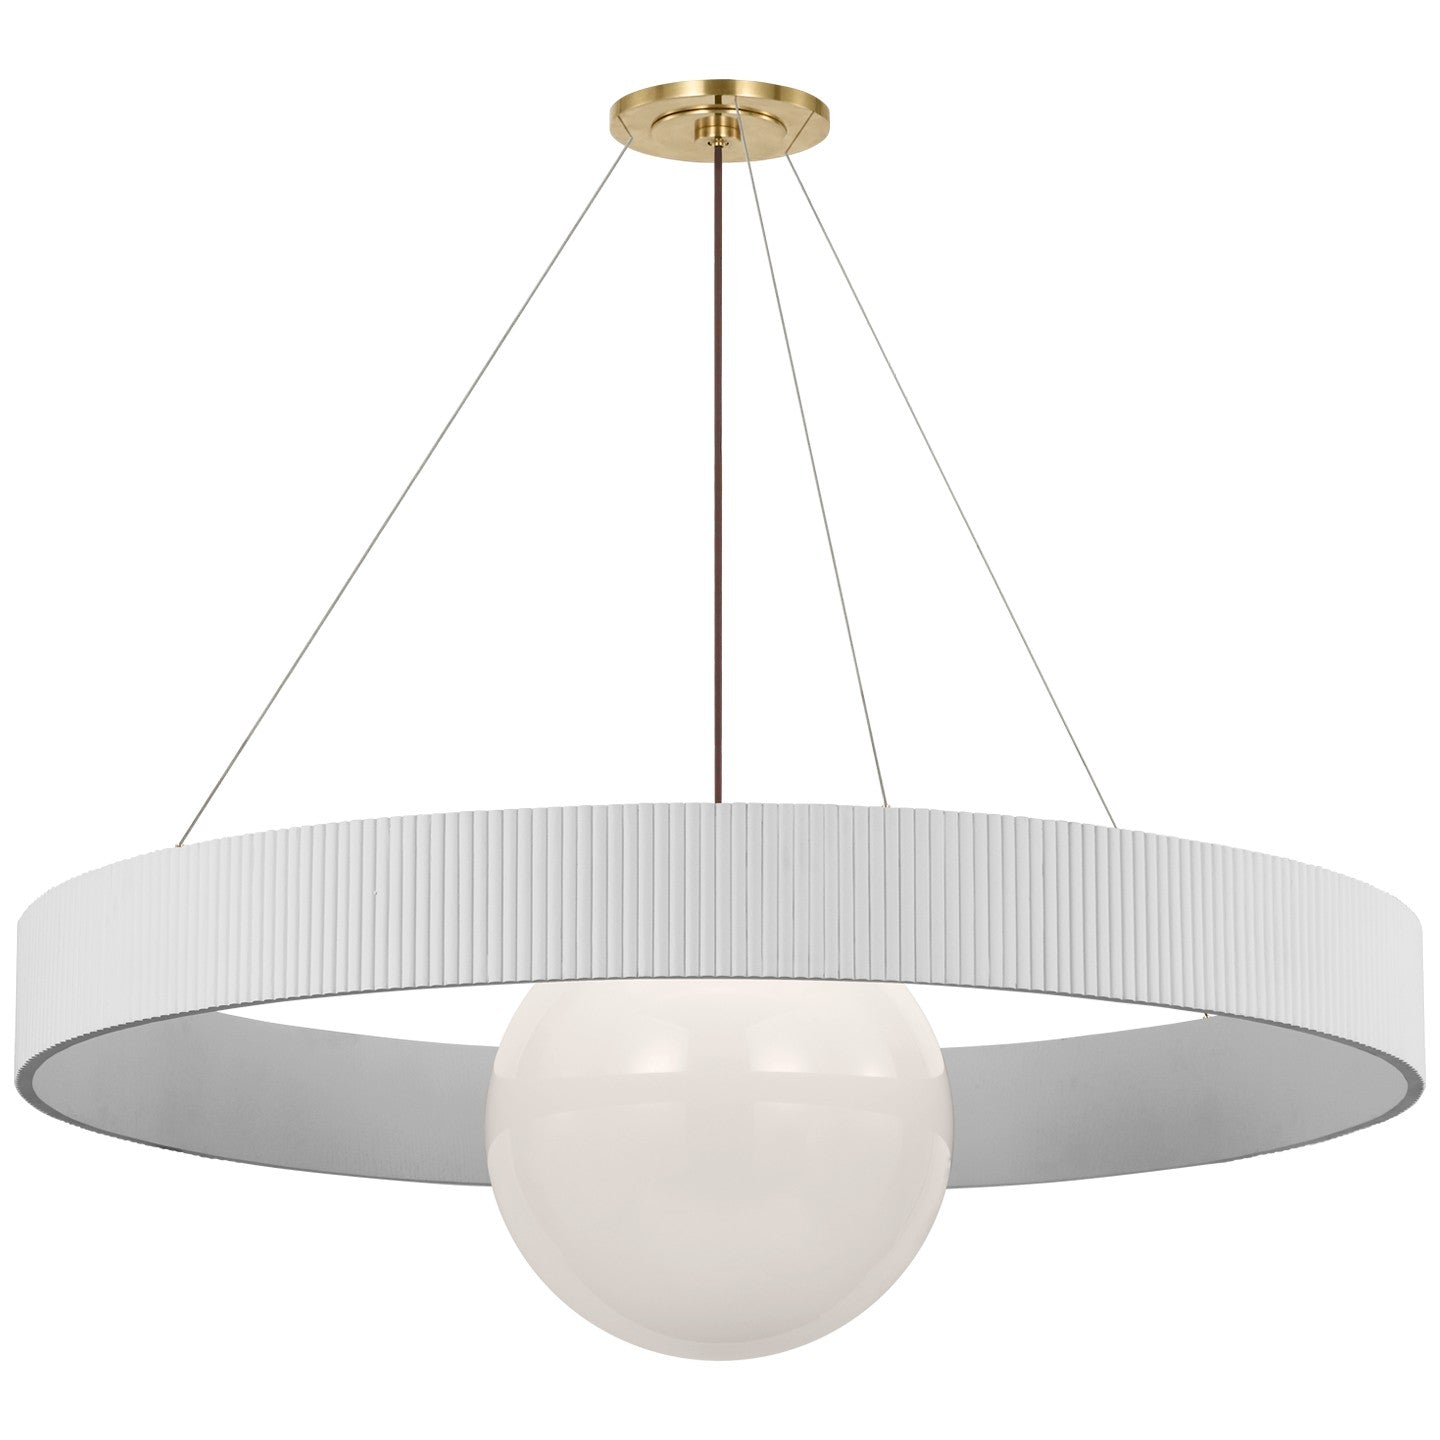 Visual Comfort Signature - WS 5002HAB/WHT-WG - LED Chandelier - Arena - Hand-Rubbed Antique Brass and White Glass